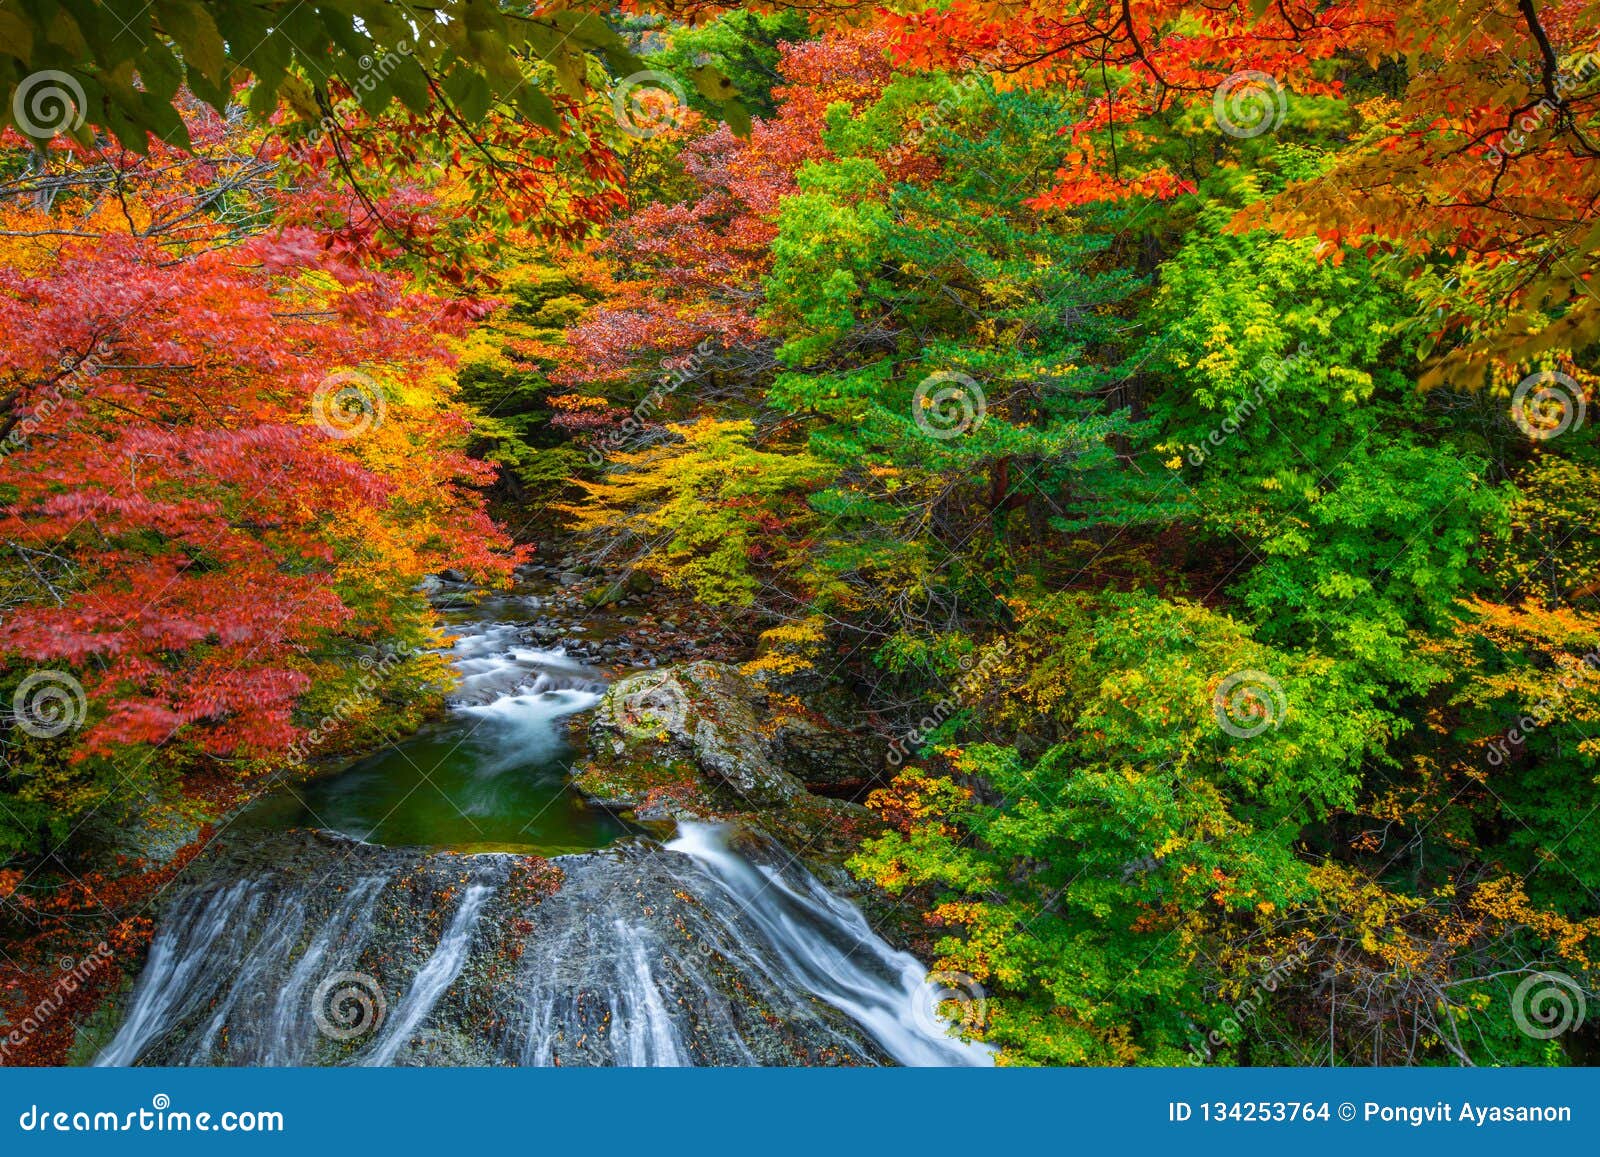 Waterfall Among Many Foliage In The Fall Leaves Leaf Color Change In